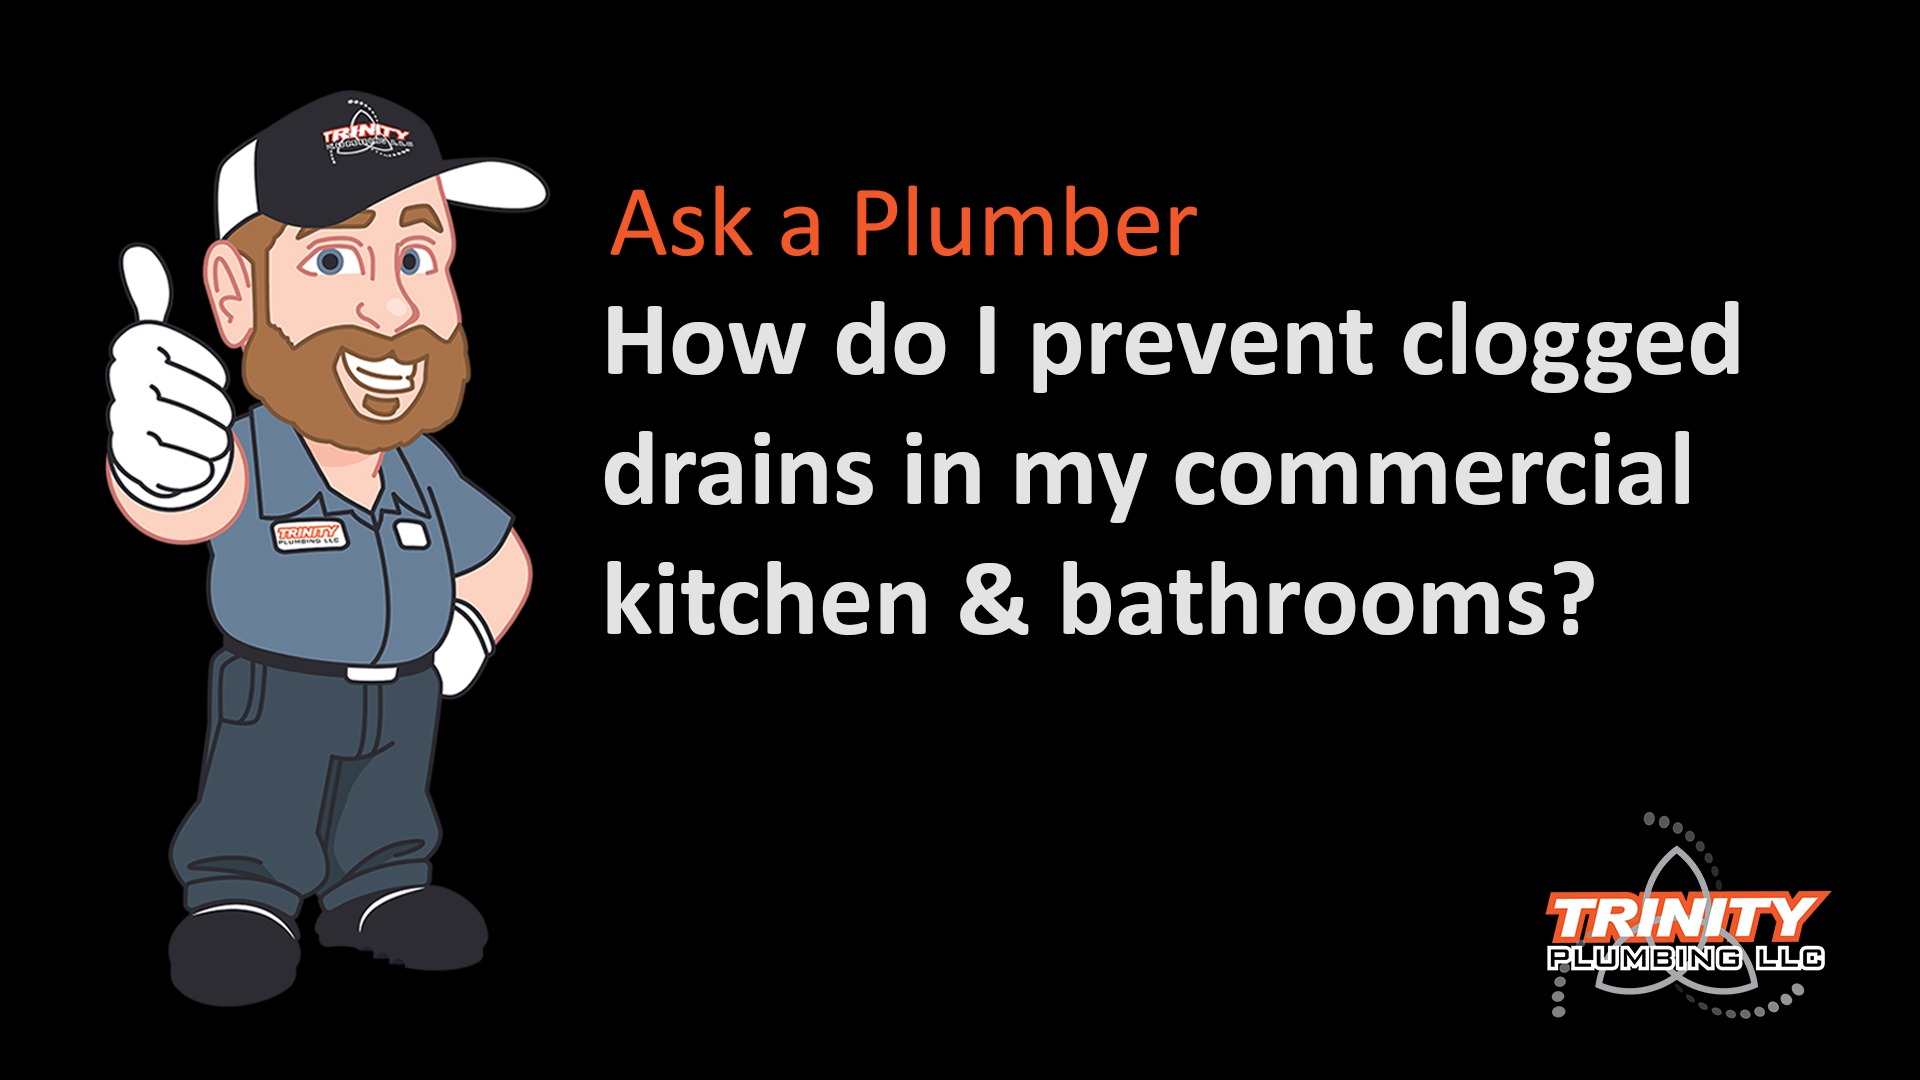 prevent clogged drains commercial kitchen bathroom trinity plumbing